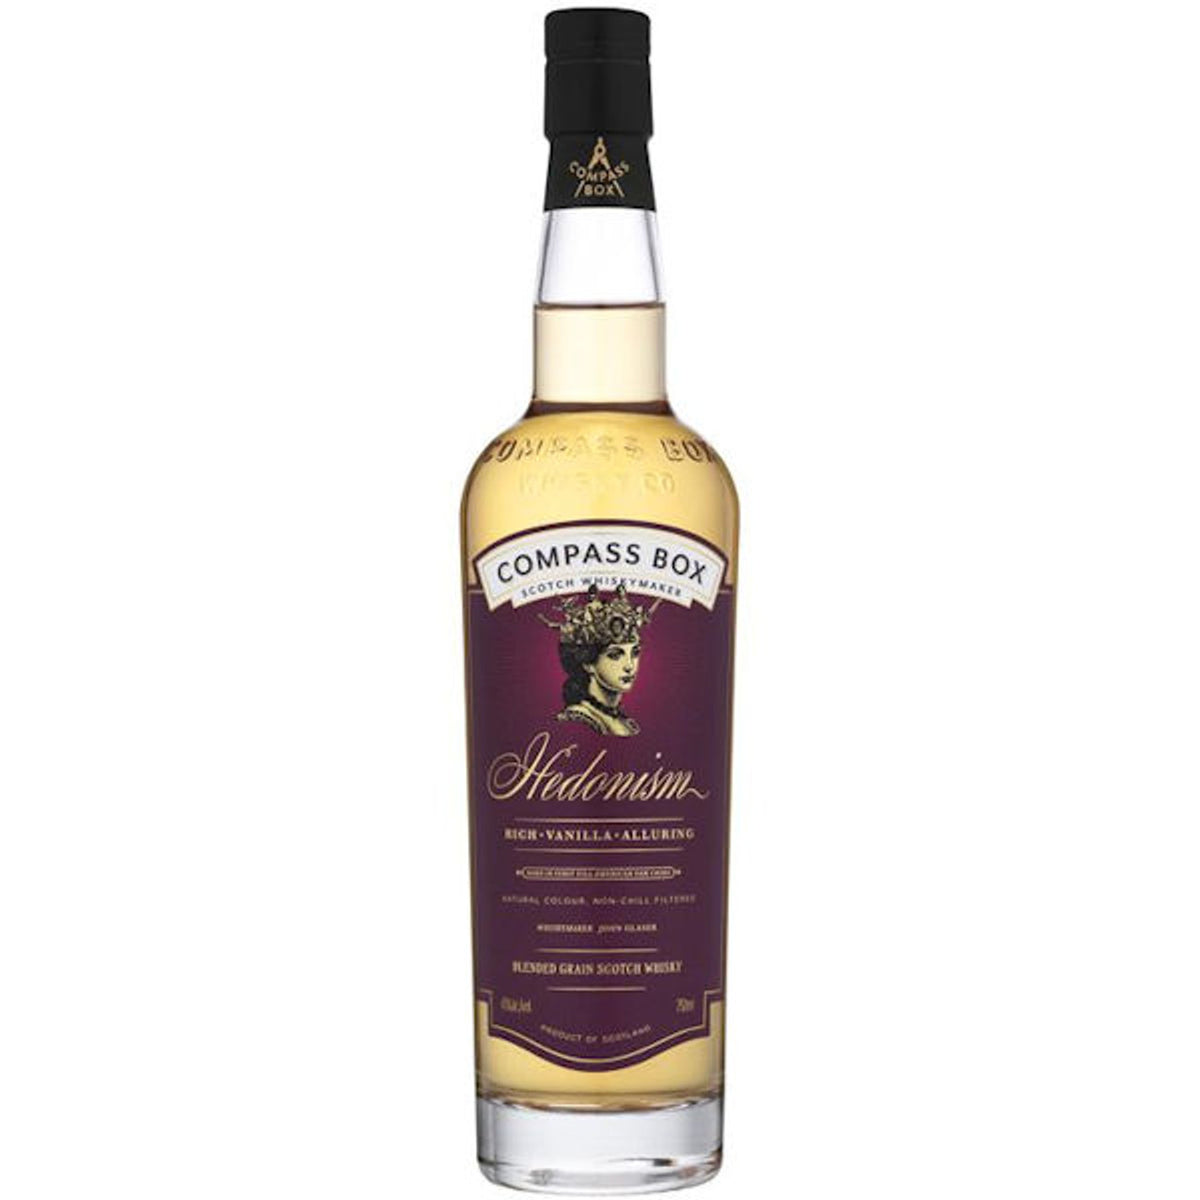 Compass Box Hedonism Blended Grain Scotch Whisky 750ml